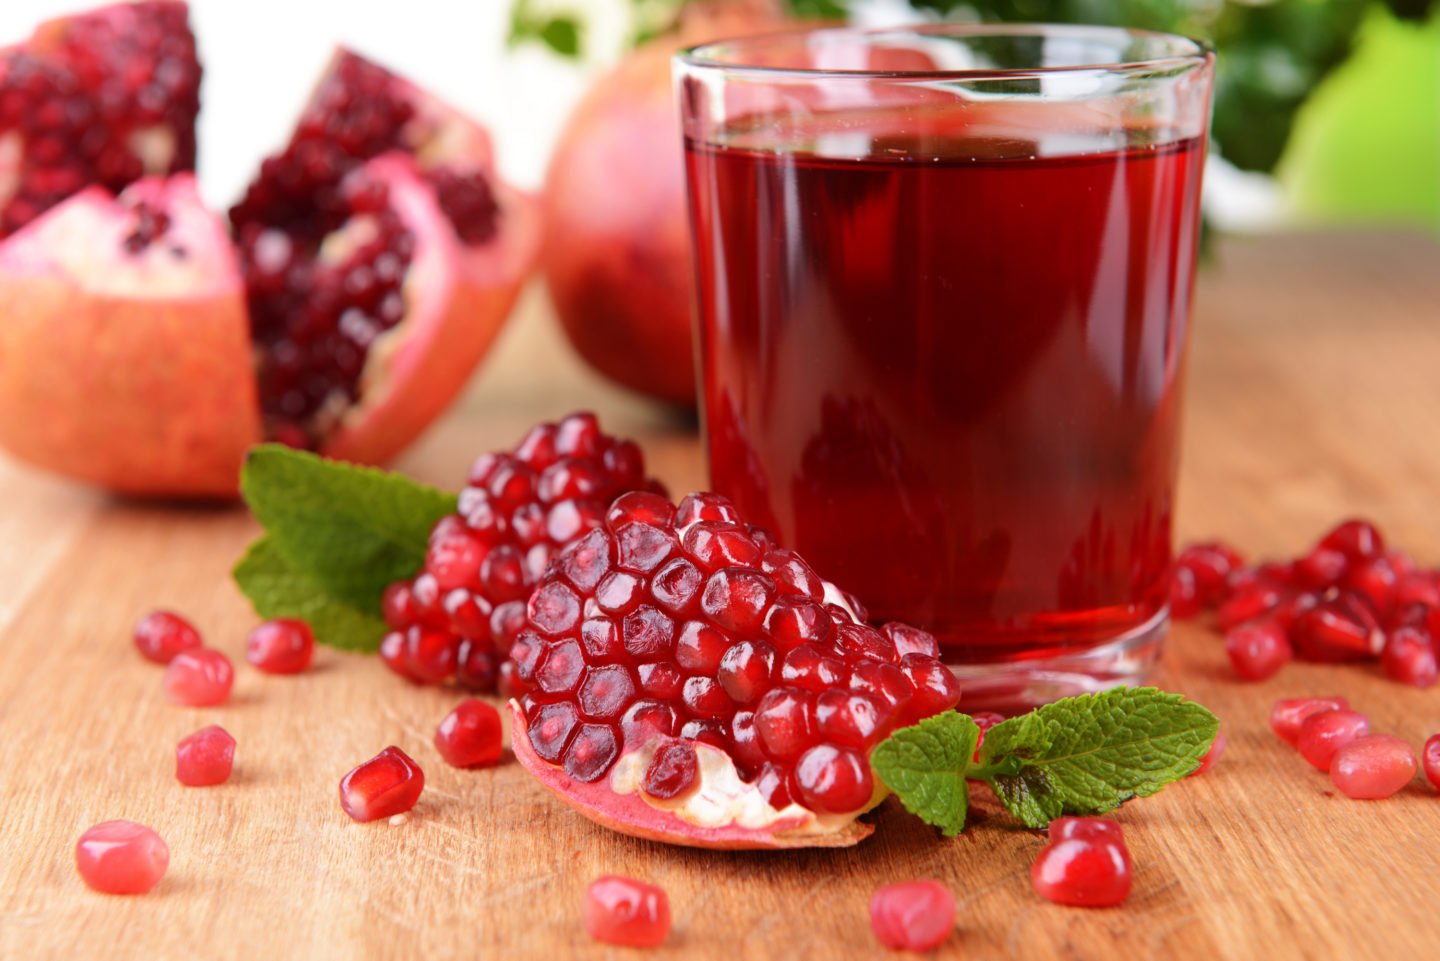 Pomegranate Juice And Seeds